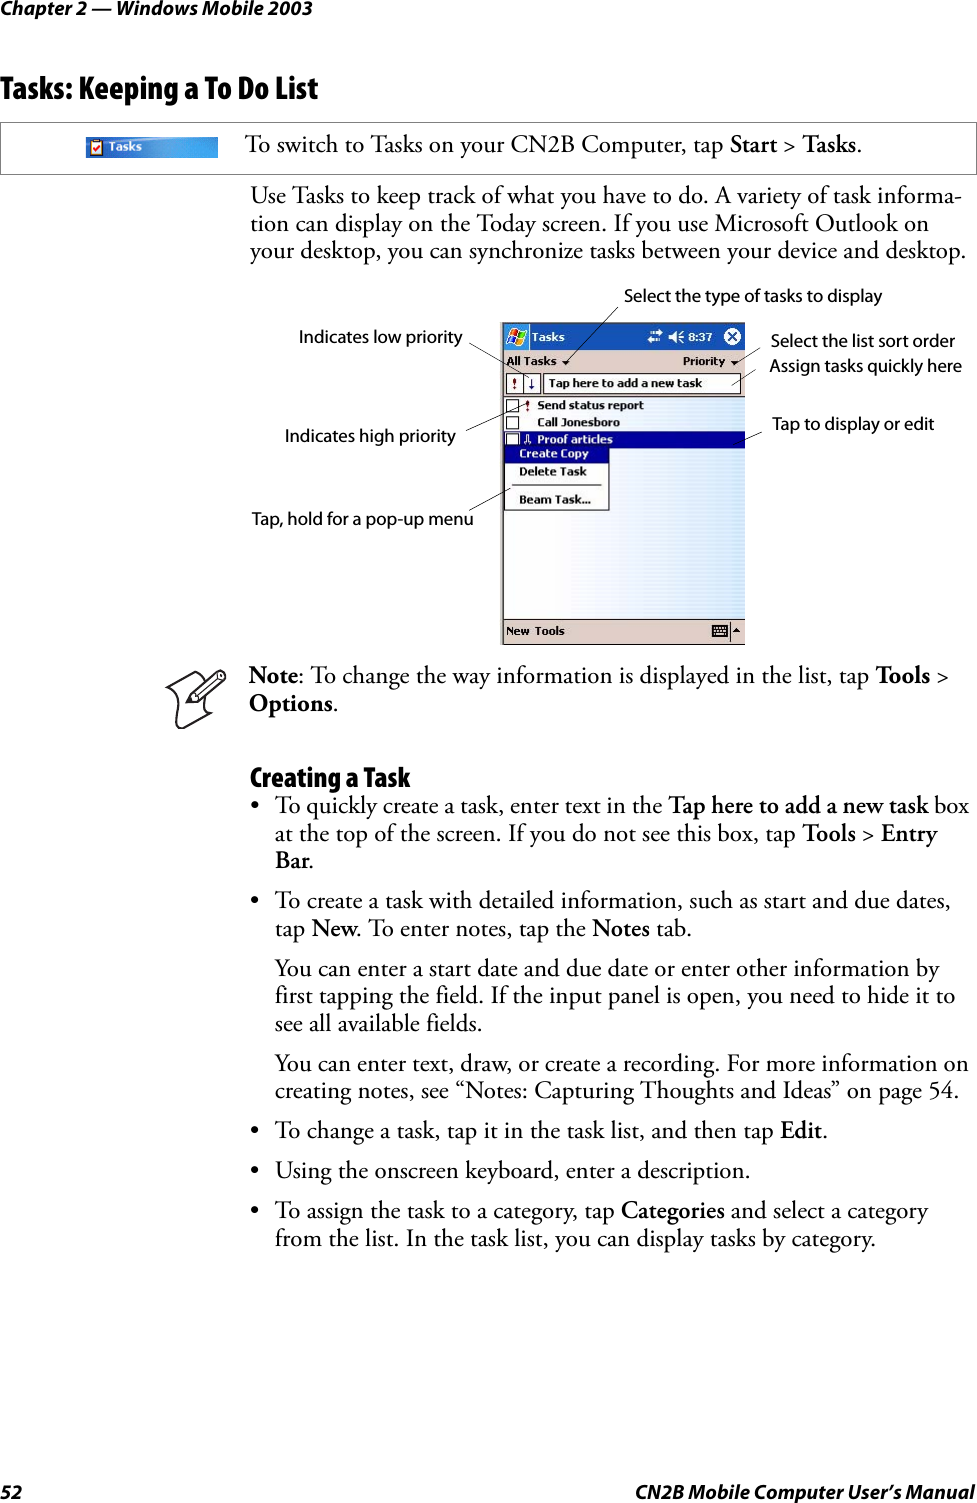 Chapter 2 — Windows Mobile 200352 CN2B Mobile Computer User’s ManualTasks: Keeping a To Do ListUse Tasks to keep track of what you have to do. A variety of task informa-tion can display on the Today screen. If you use Microsoft Outlook on your desktop, you can synchronize tasks between your device and desktop.Creating a Task• To quickly create a task, enter text in the Tap here to add a new task box at the top of the screen. If you do not see this box, tap To o l s  &gt; Entry Bar.• To create a task with detailed information, such as start and due dates, tap New. To enter notes, tap the Notes tab. You can enter a start date and due date or enter other information by first tapping the field. If the input panel is open, you need to hide it to see all available fields.You can enter text, draw, or create a recording. For more information on creating notes, see “Notes: Capturing Thoughts and Ideas” on page 54.• To change a task, tap it in the task list, and then tap Edit.• Using the onscreen keyboard, enter a description.• To assign the task to a category, tap Categories and select a category from the list. In the task list, you can display tasks by category.To switch to Tasks on your CN2B Computer, tap Start &gt; Tas ks .Note: To change the way information is displayed in the list, tap To o l s  &gt; Options.Select the type of tasks to displaySelect the list sort orderAssign tasks quickly hereIndicates high priority Tap to display or editTap, hold for a pop-up menuIndicates low priority